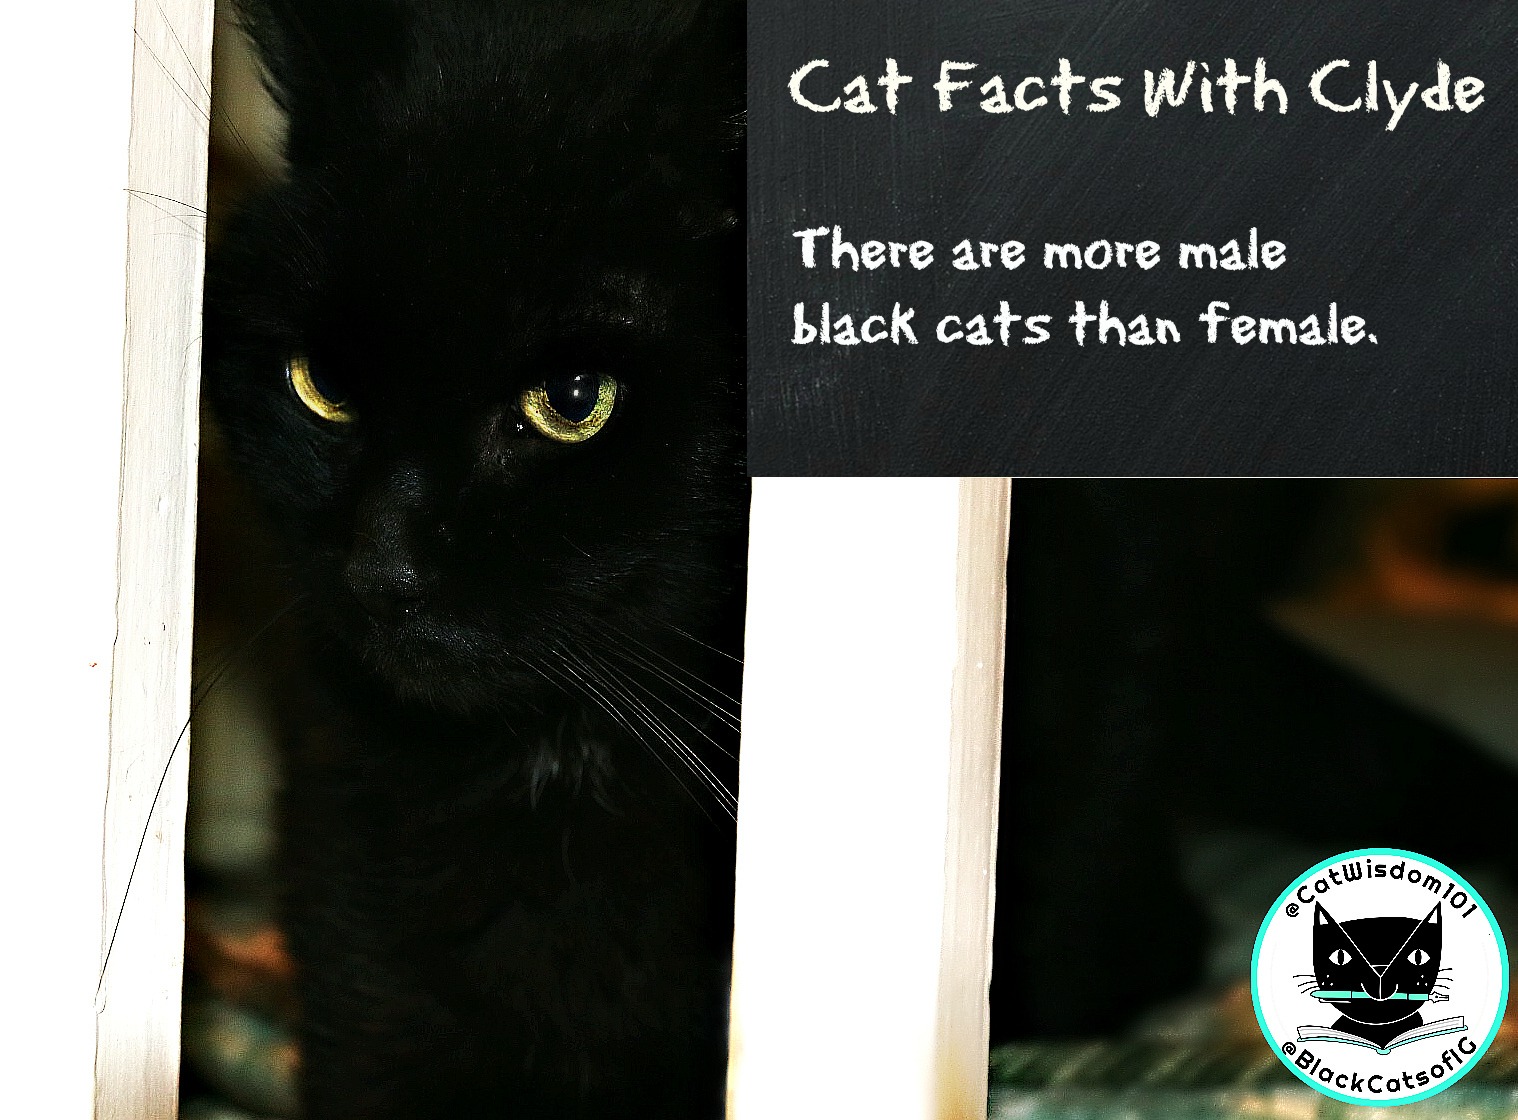 Clyde_cat_facts_black